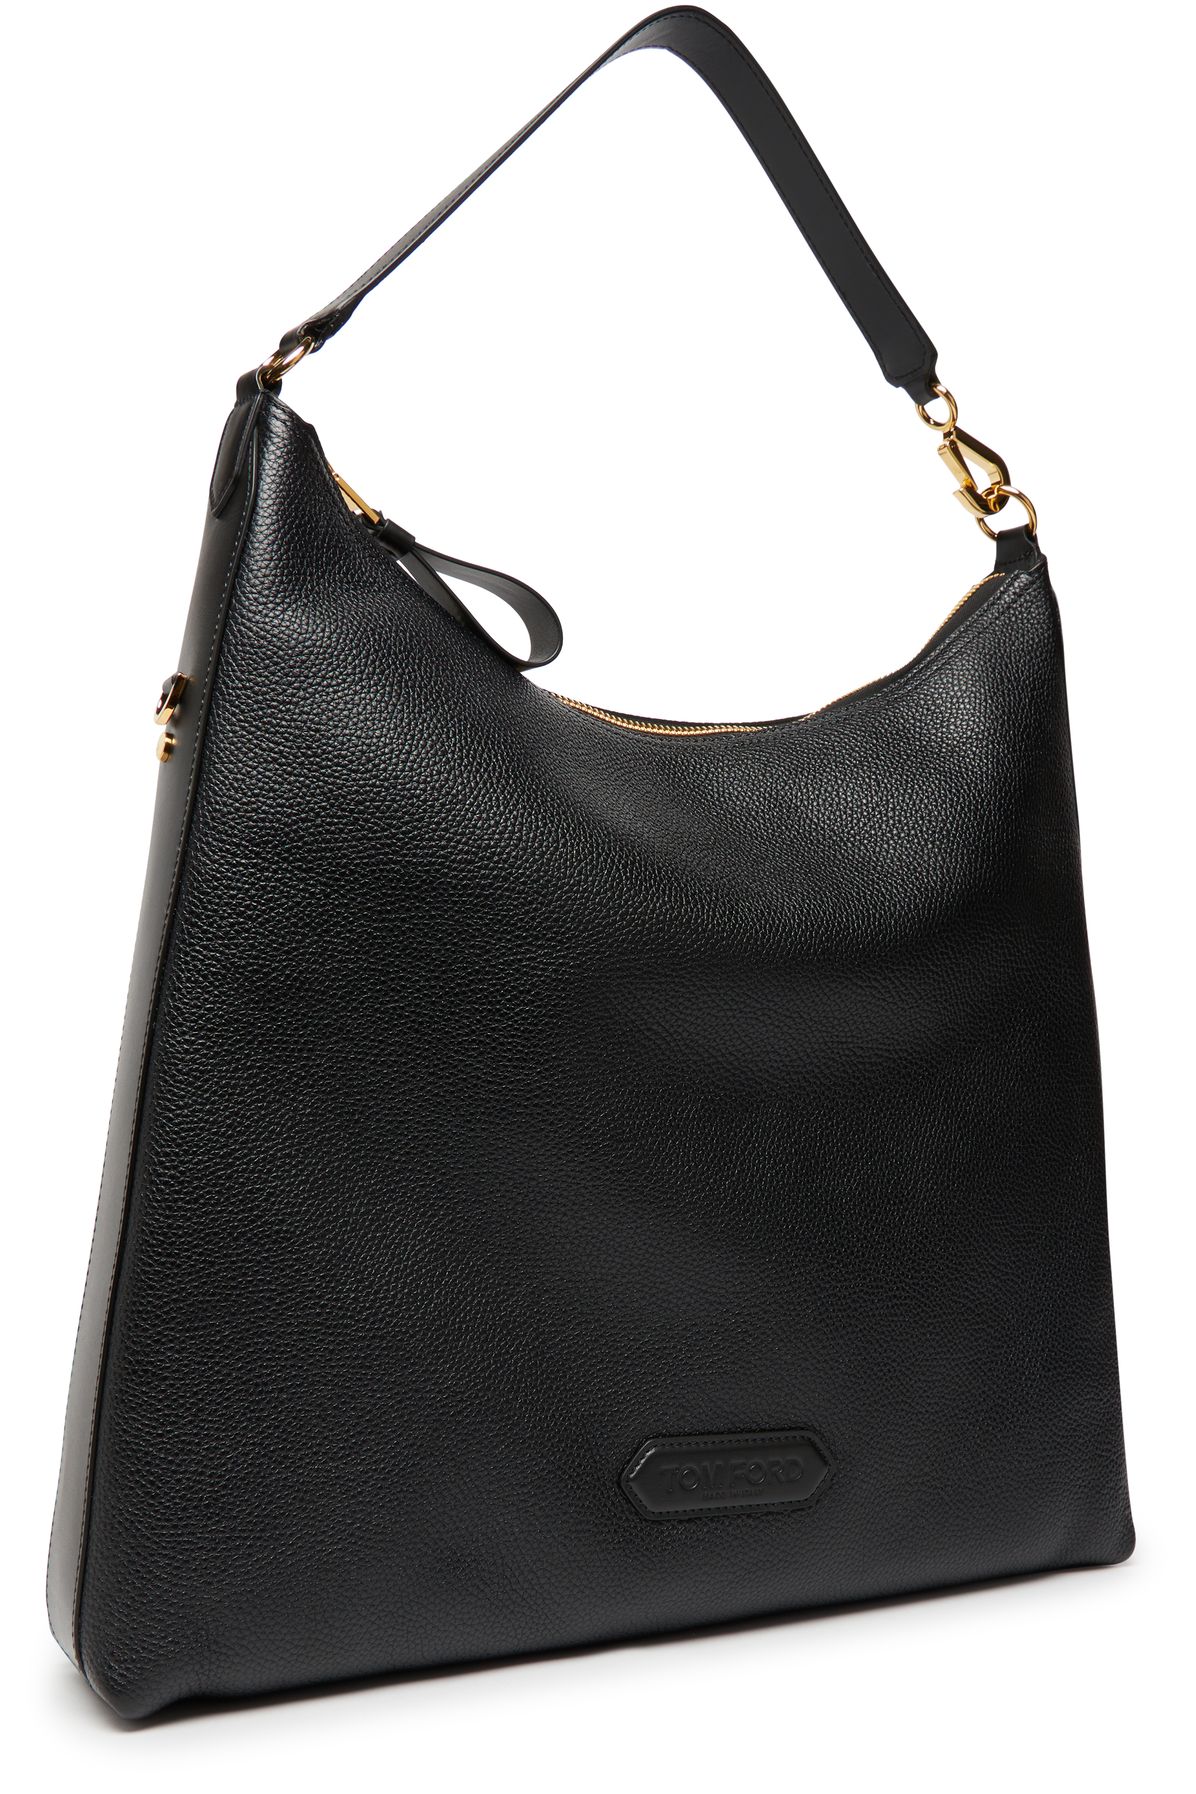 Tom Ford Hand-held bag